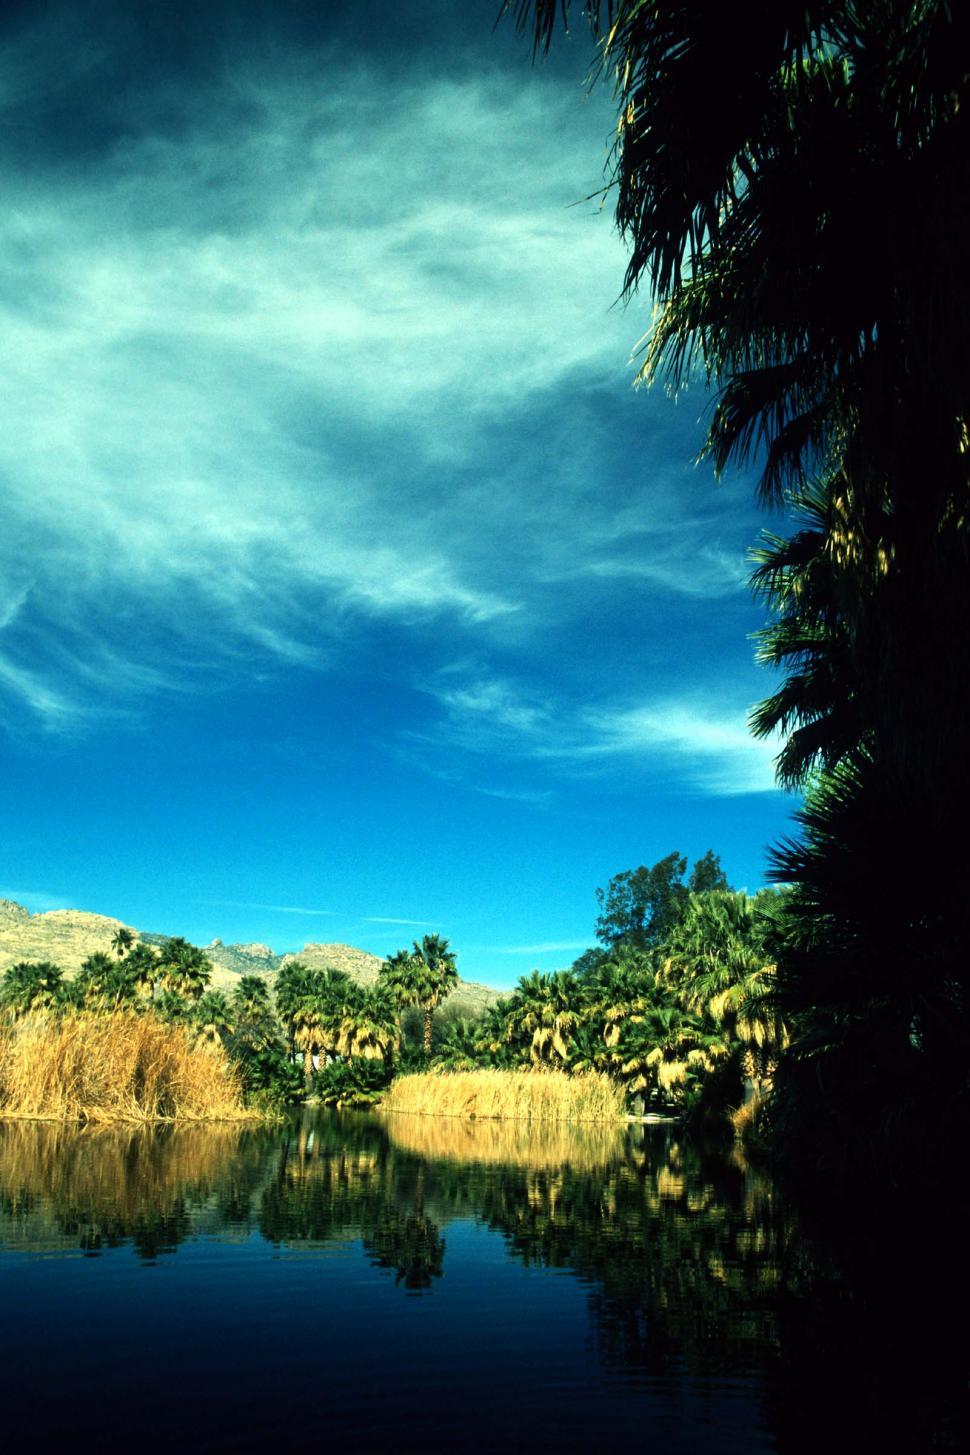 Free Image of reflections fronds plants contrast blue sky lake oasis reeds riparian sanctuary palms clouds wispy pond tucson arizona trees 